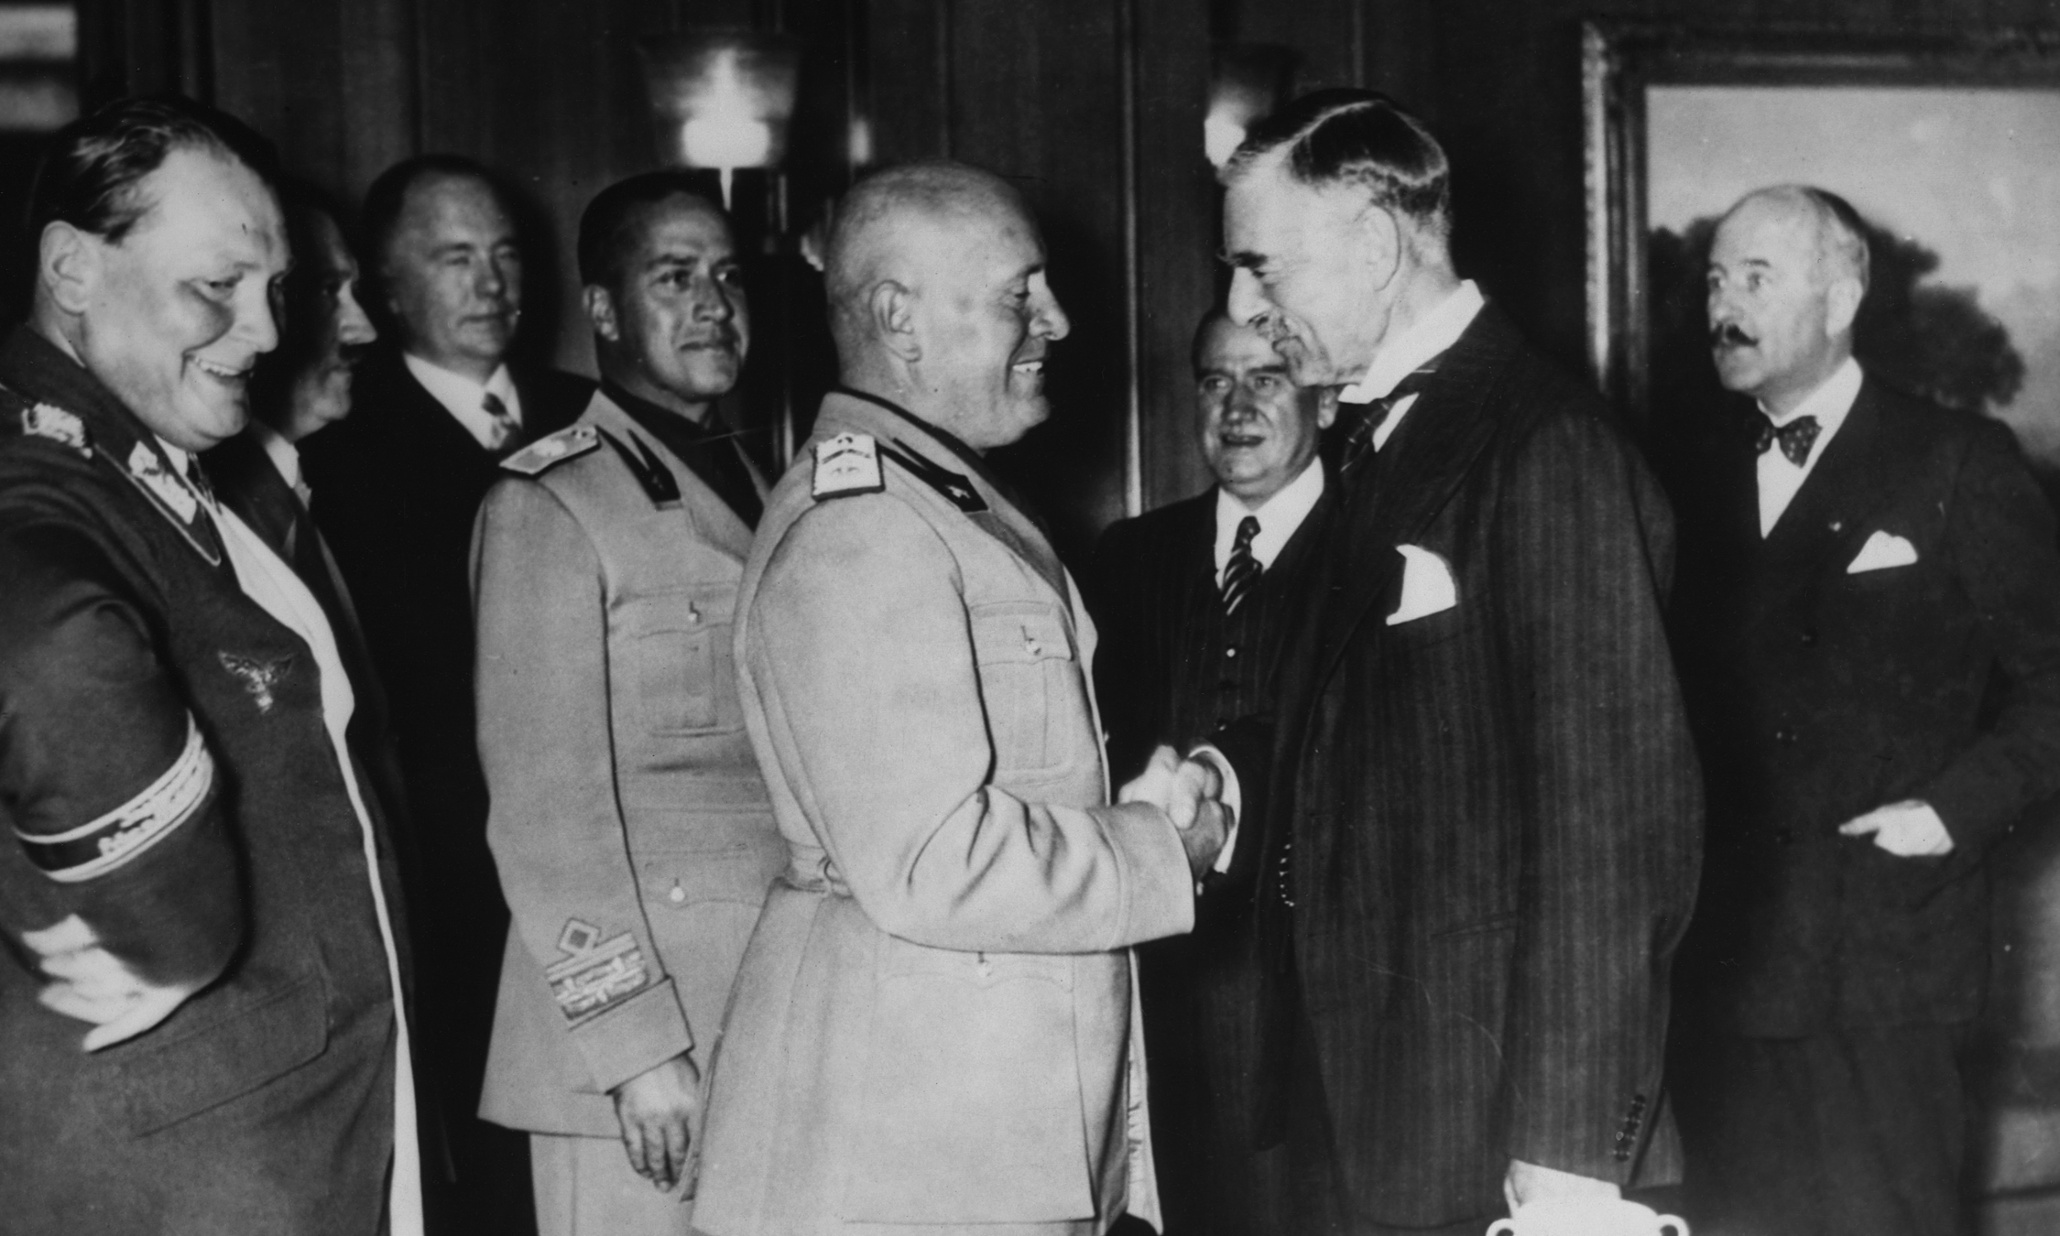 Chamberlain To Hitler Waiting For Commitment To Peace From The Archive December